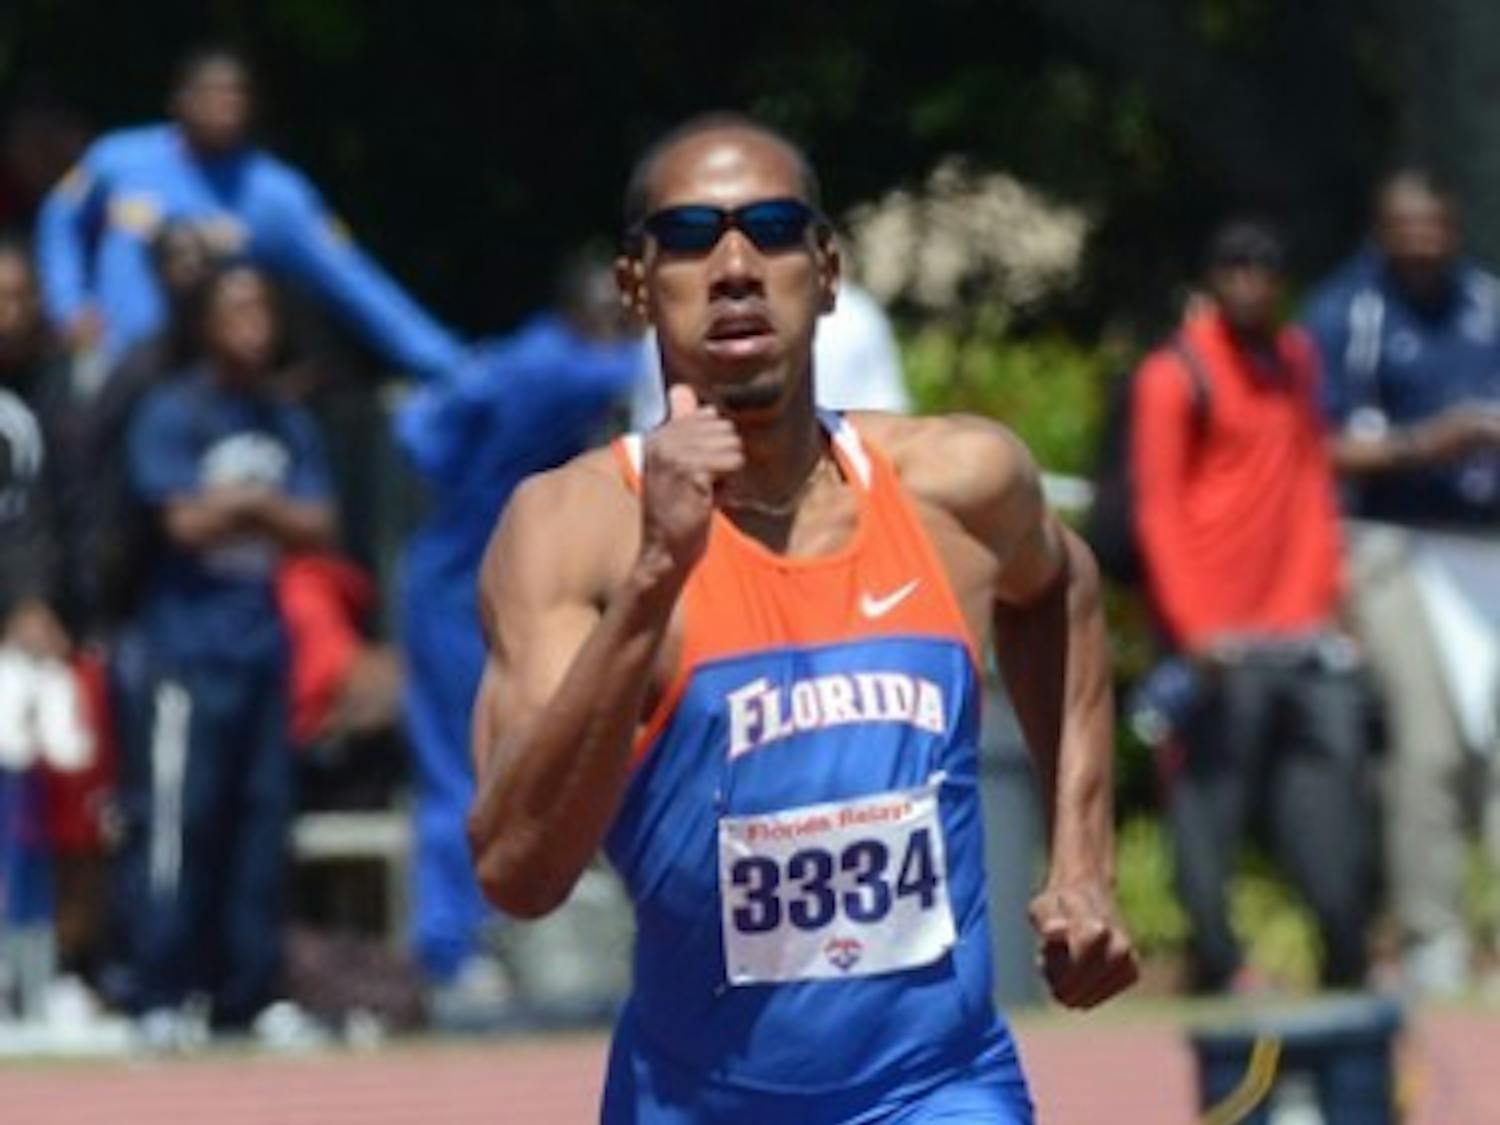 Junior track and field star Christian Taylor won the 2010-11 alligatorSports Male Athlete of the Year award, leaping past the competition.